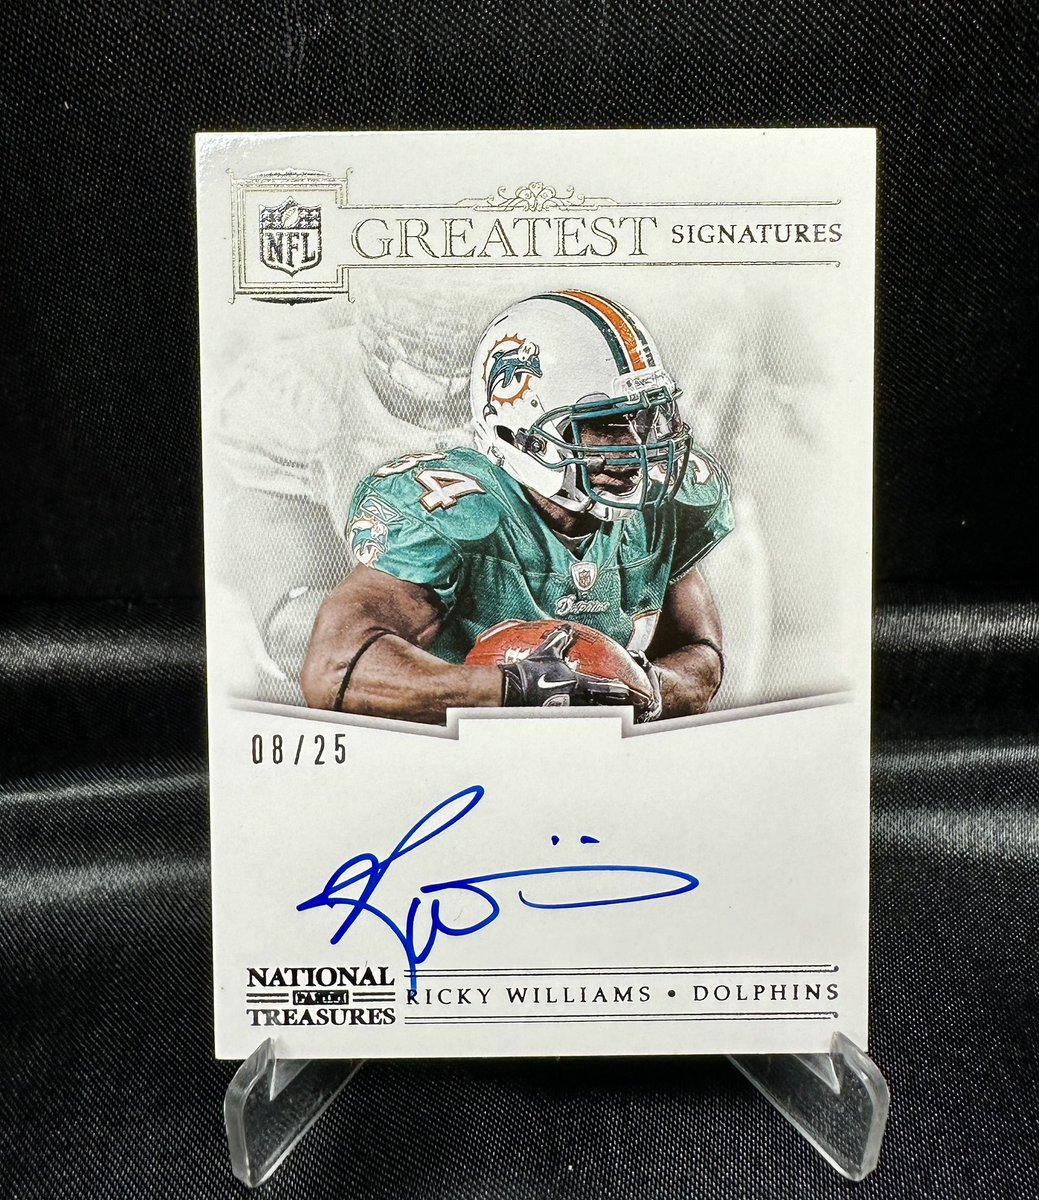 Newest addition to the Ricky Williams collection arrived today 🔥

#FinsUp #thehobby #whodoyoucollect